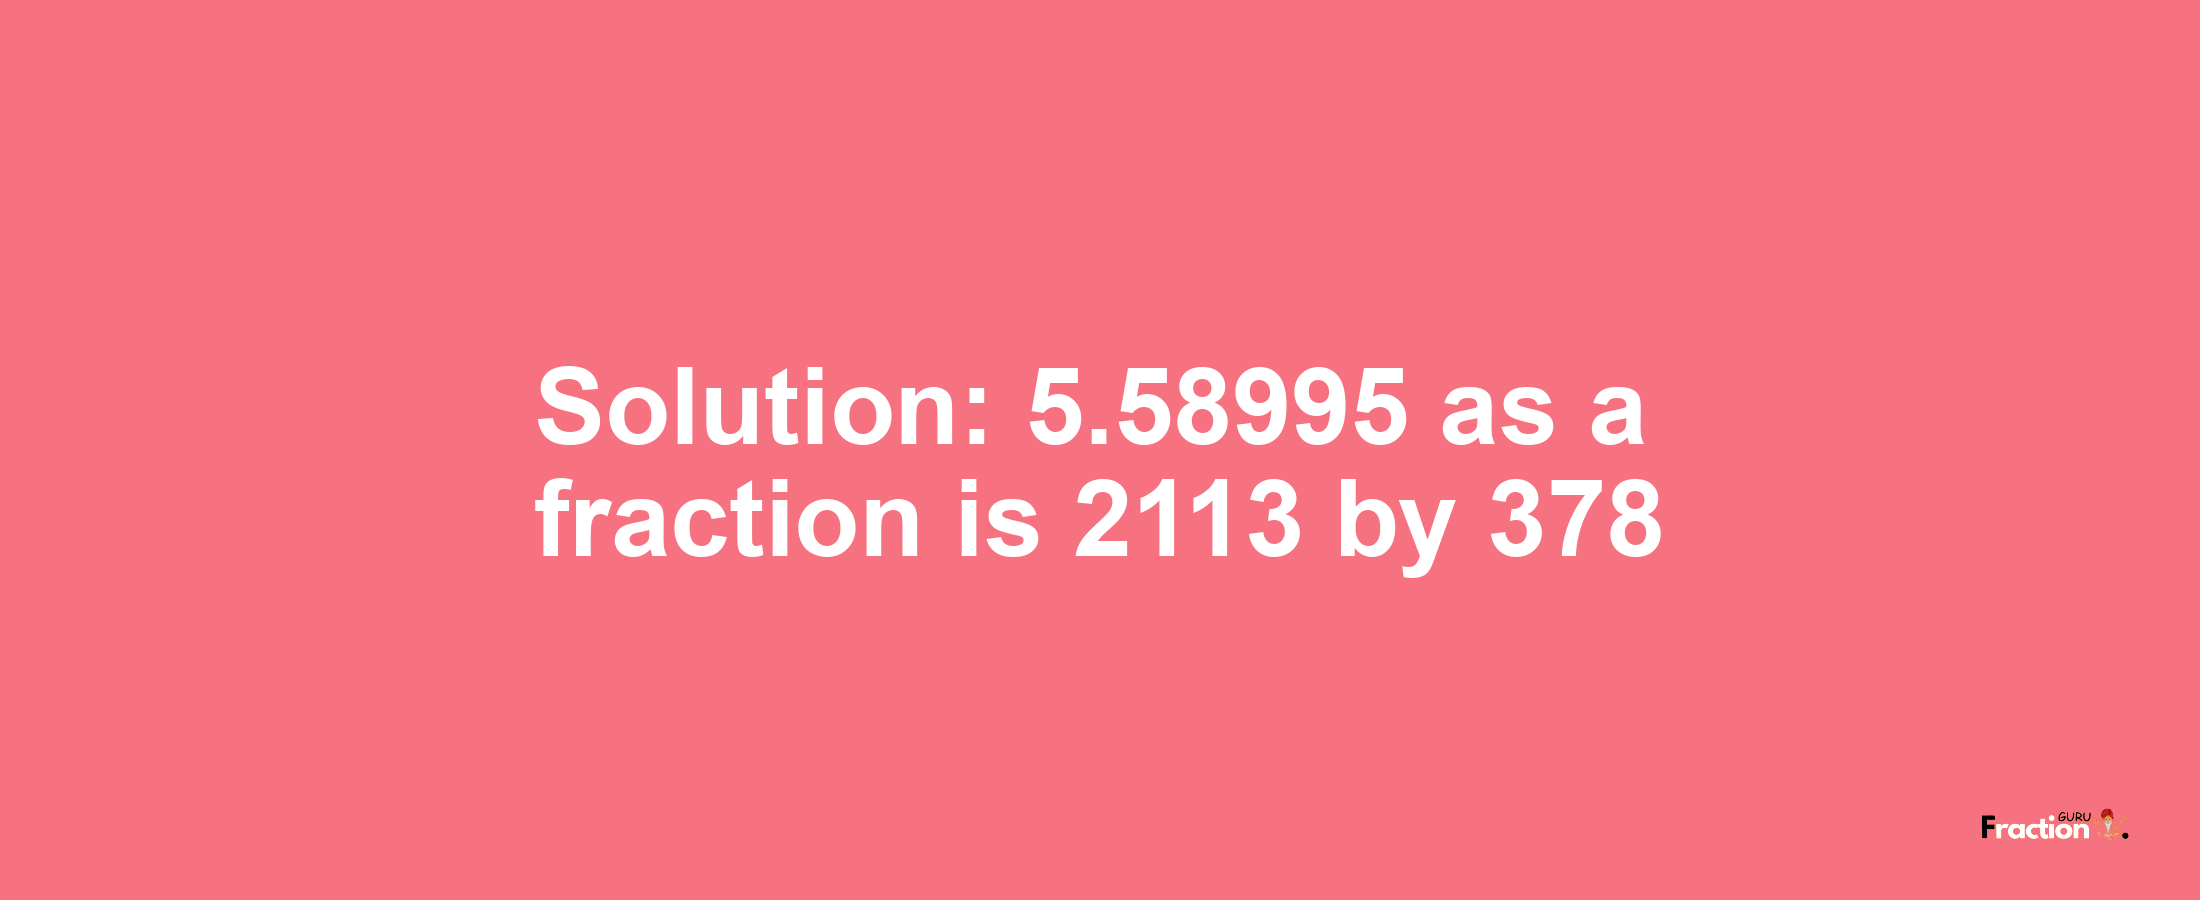 Solution:5.58995 as a fraction is 2113/378